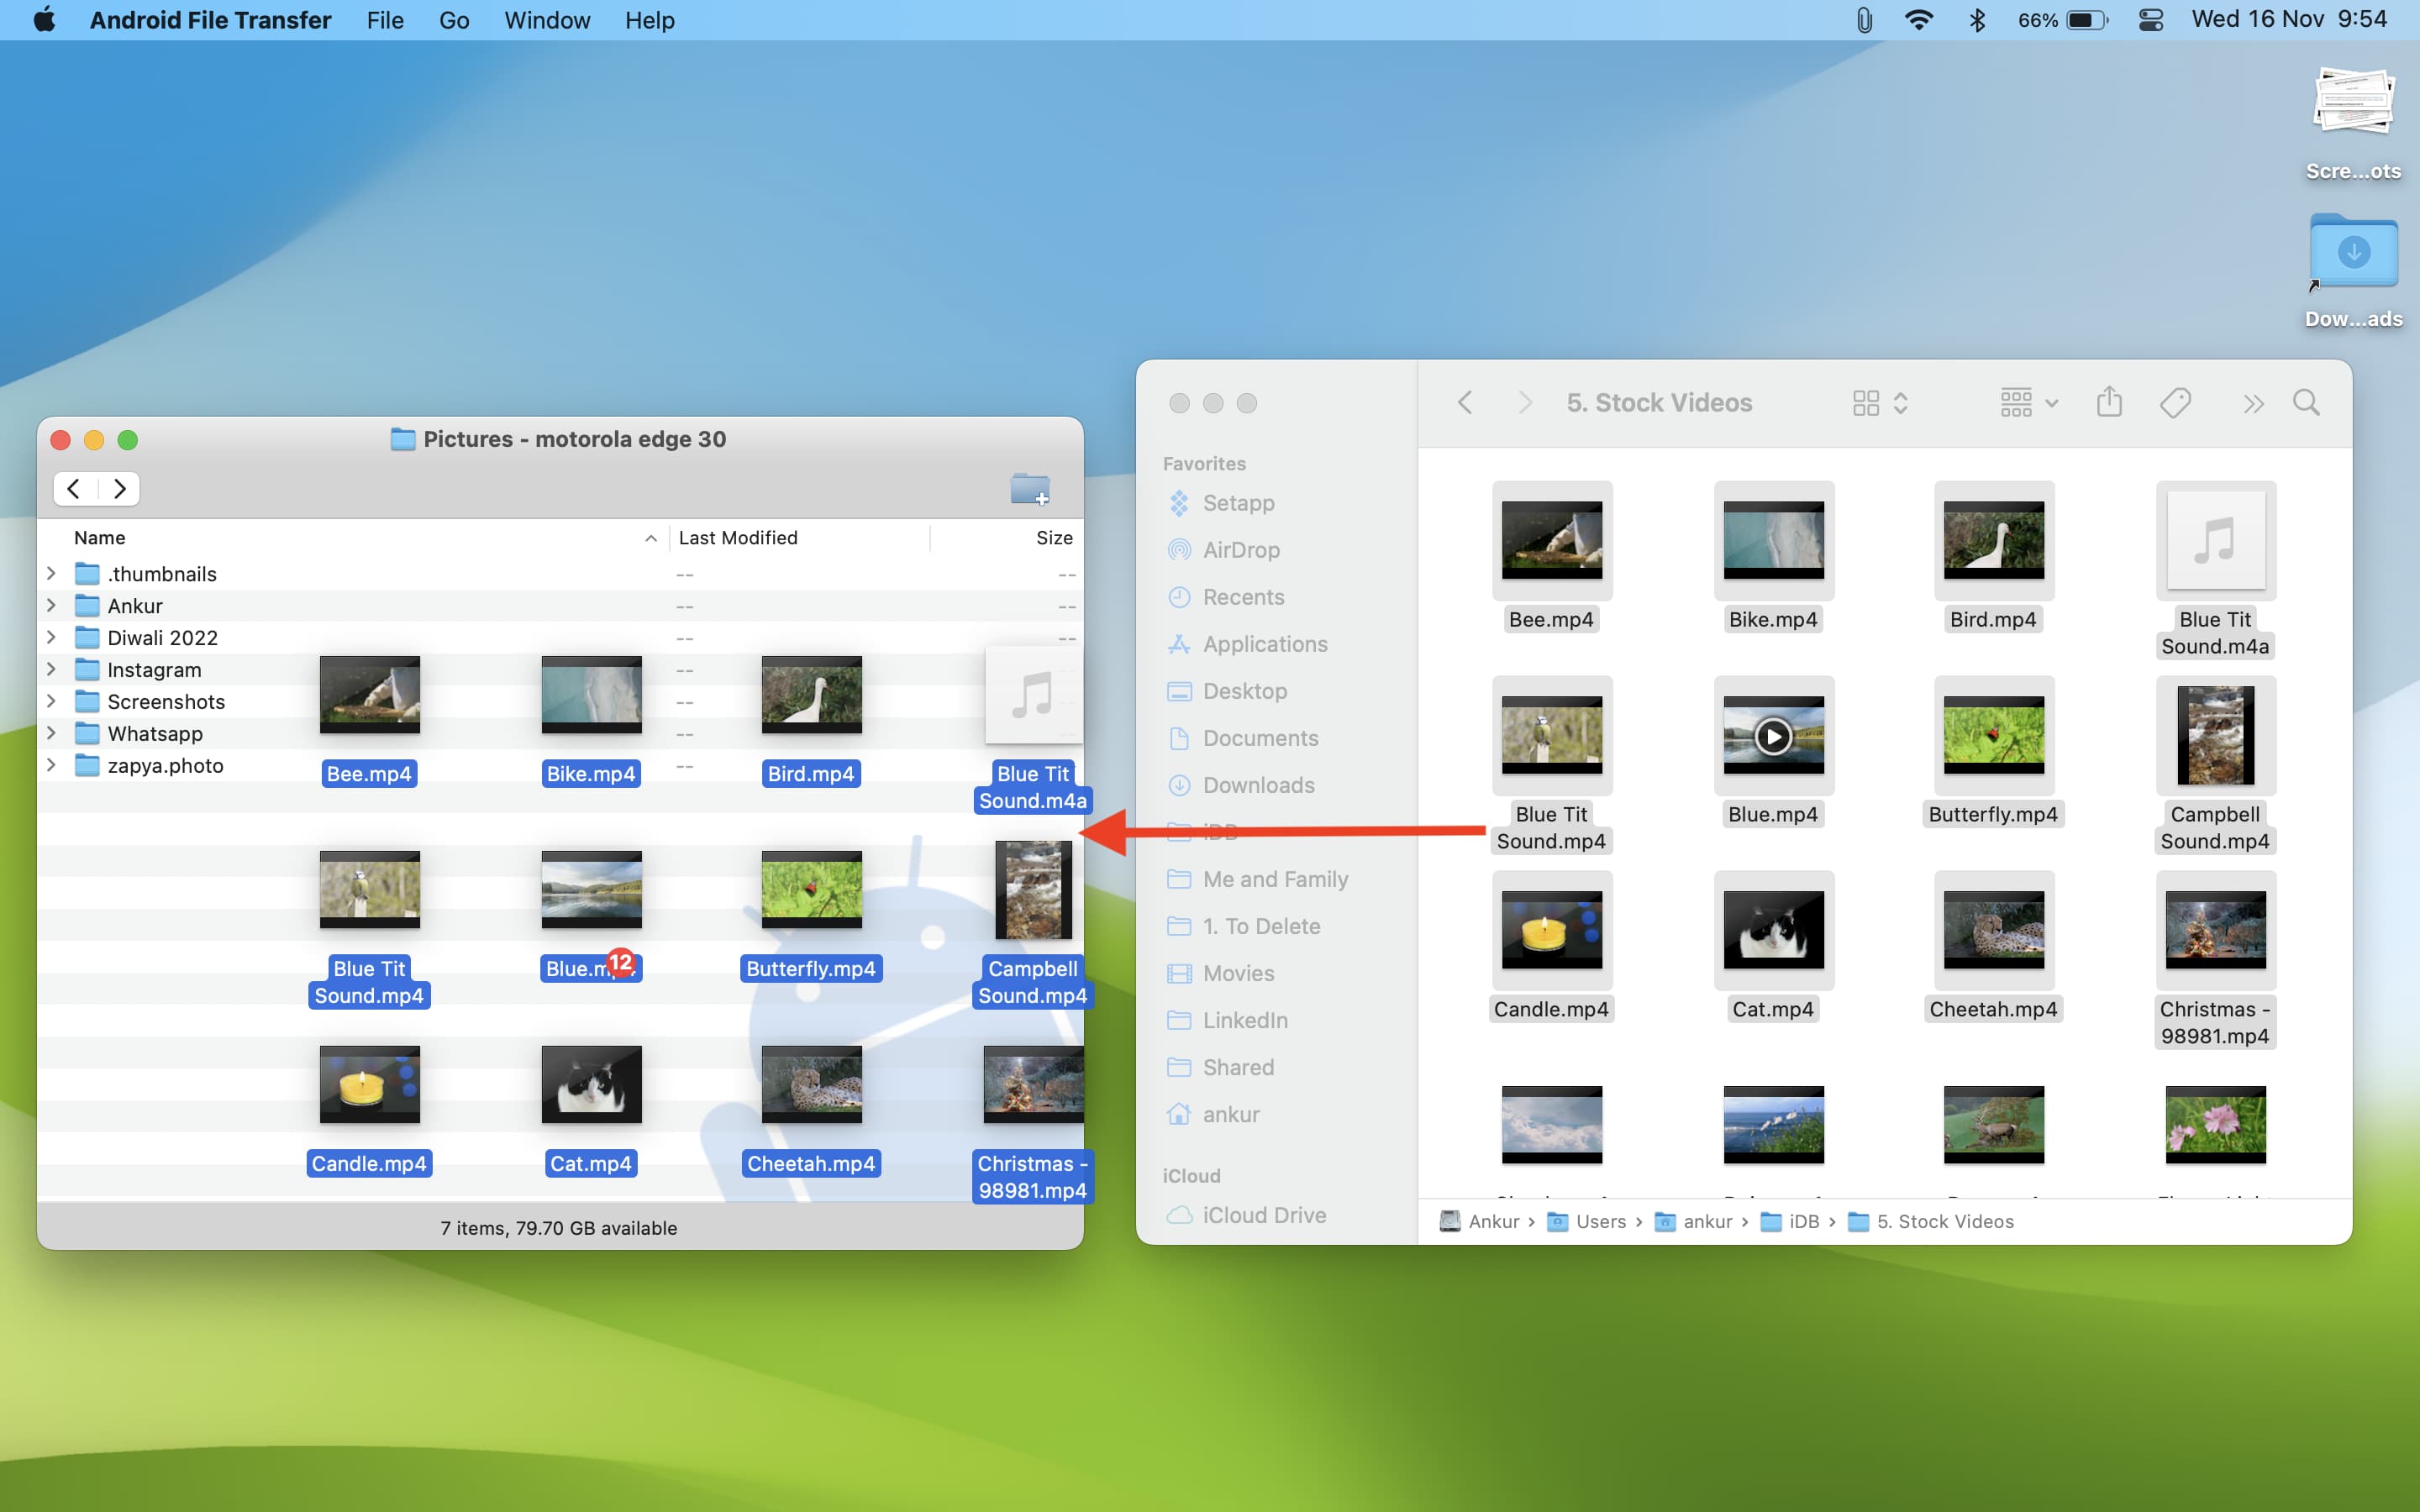 Transfer files from Mac to Android using Android File Transfer